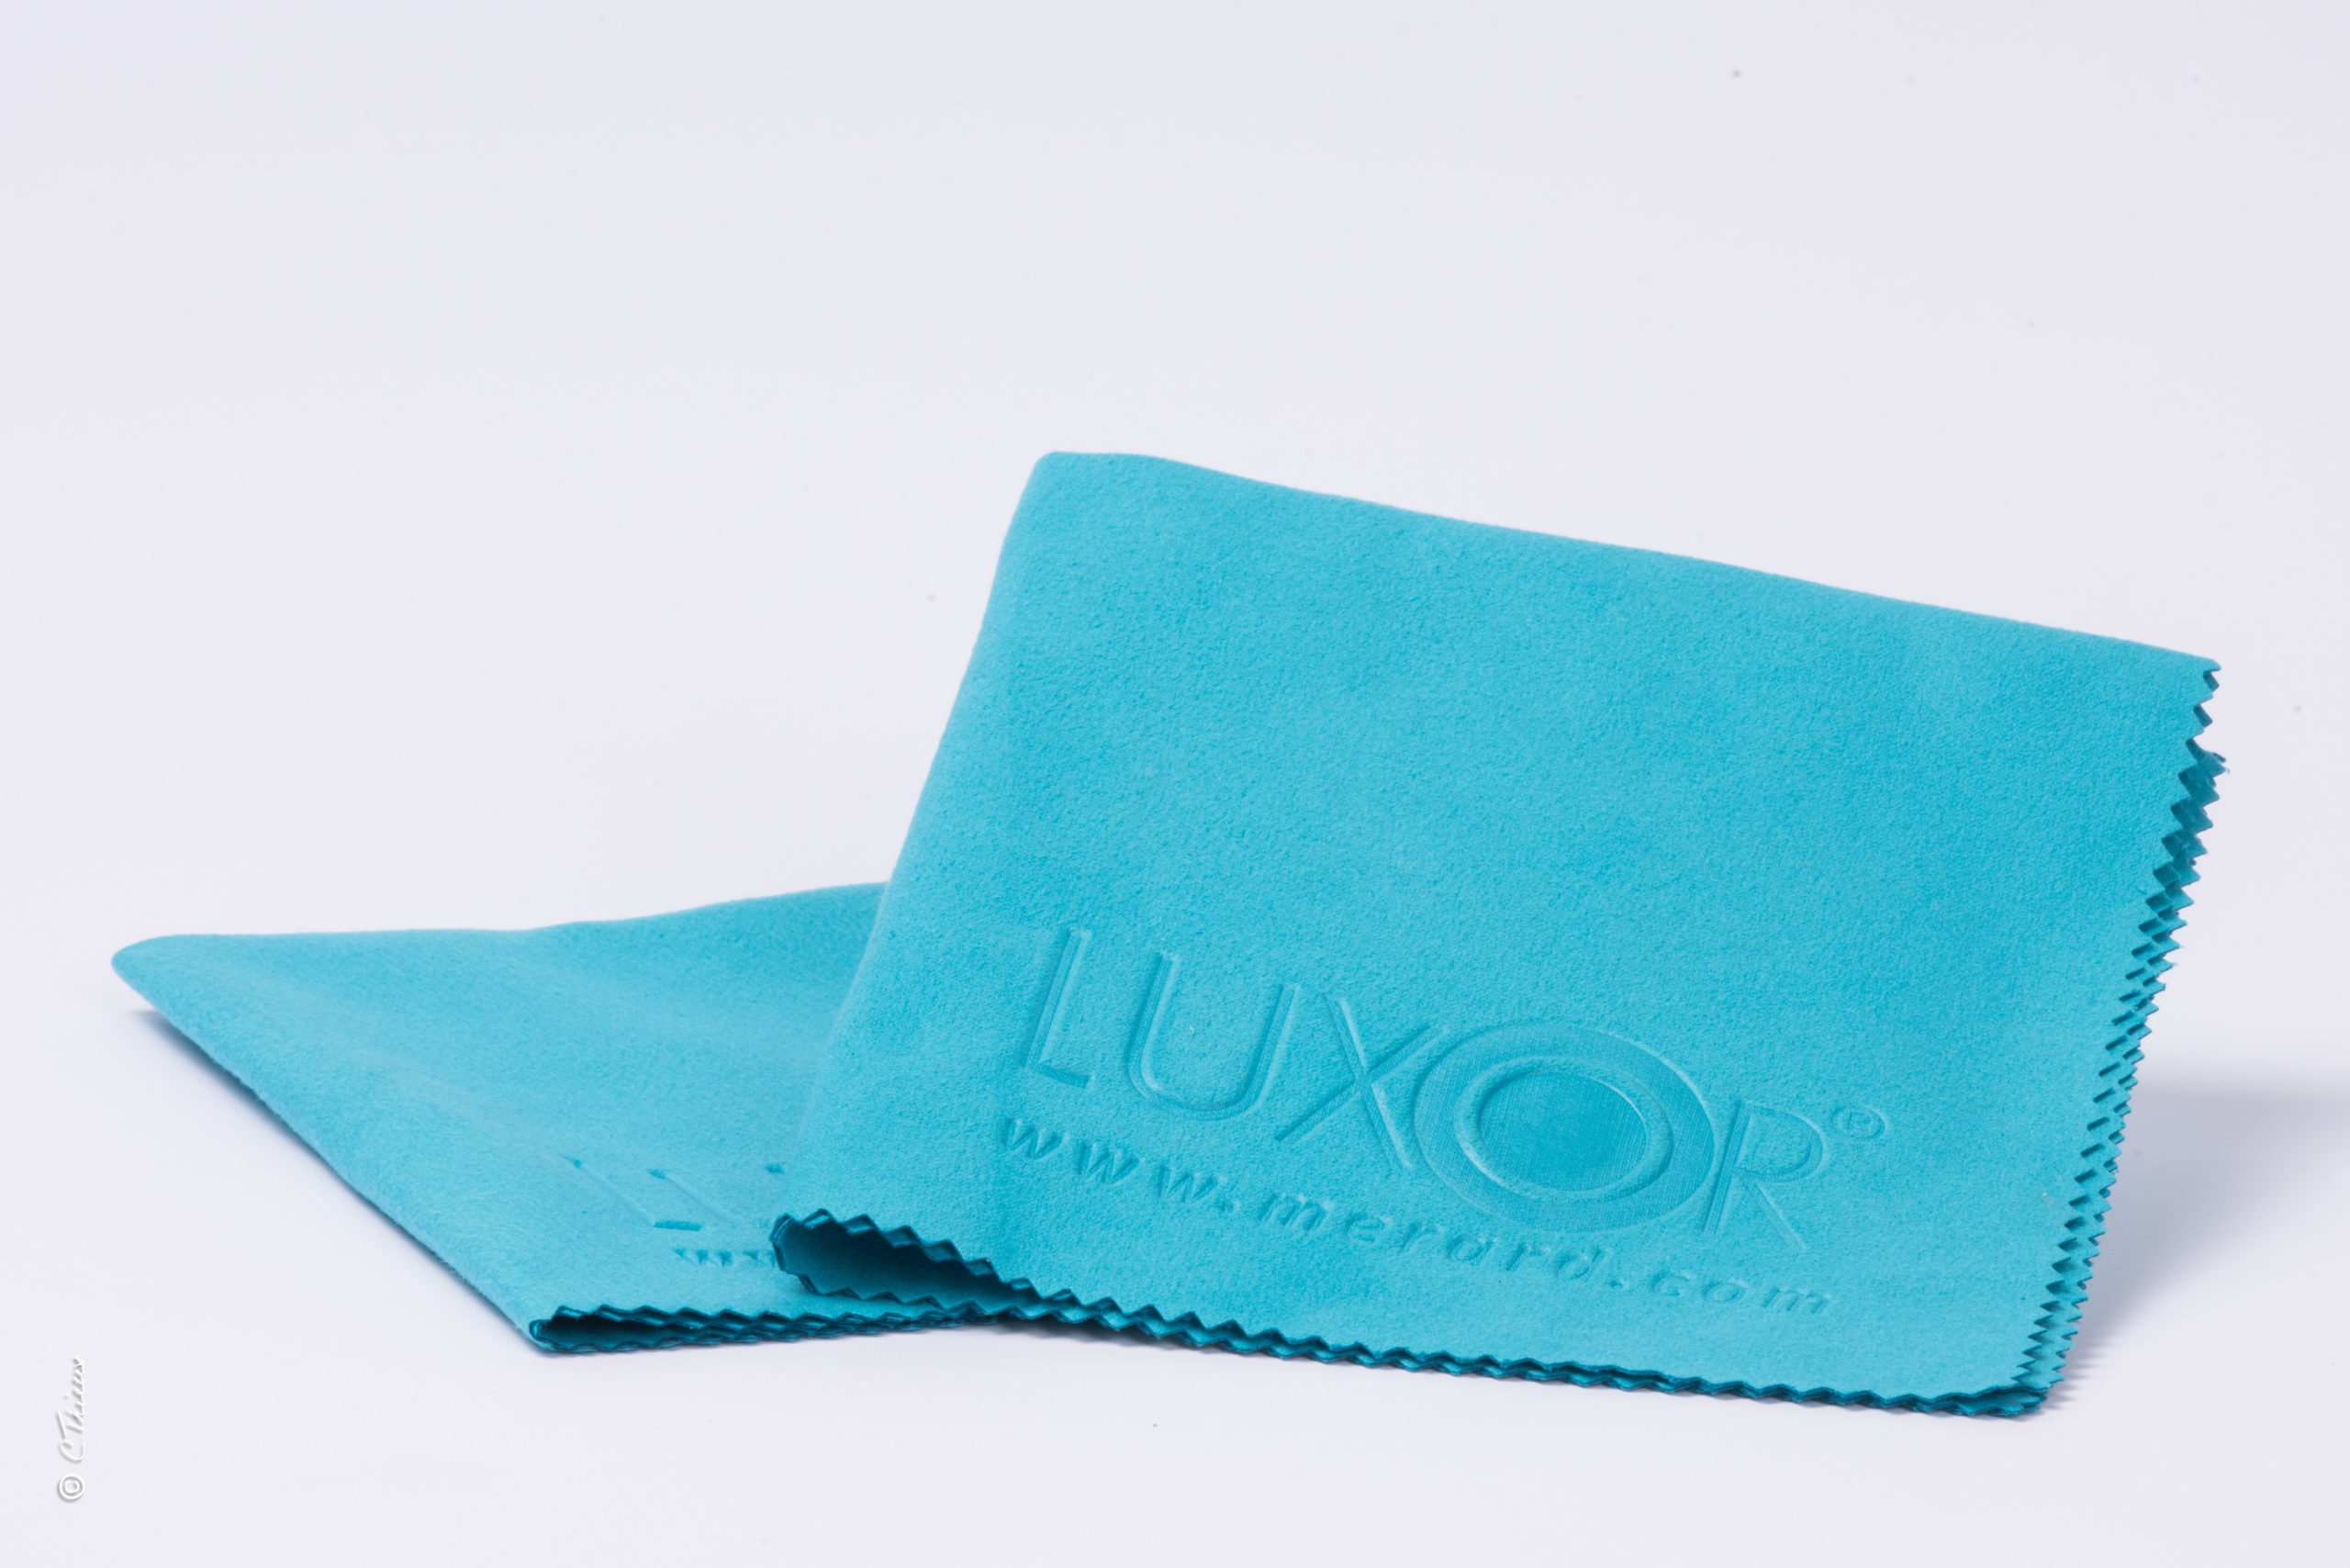 LUXOR compound and buffing mop for gold silver jewelry